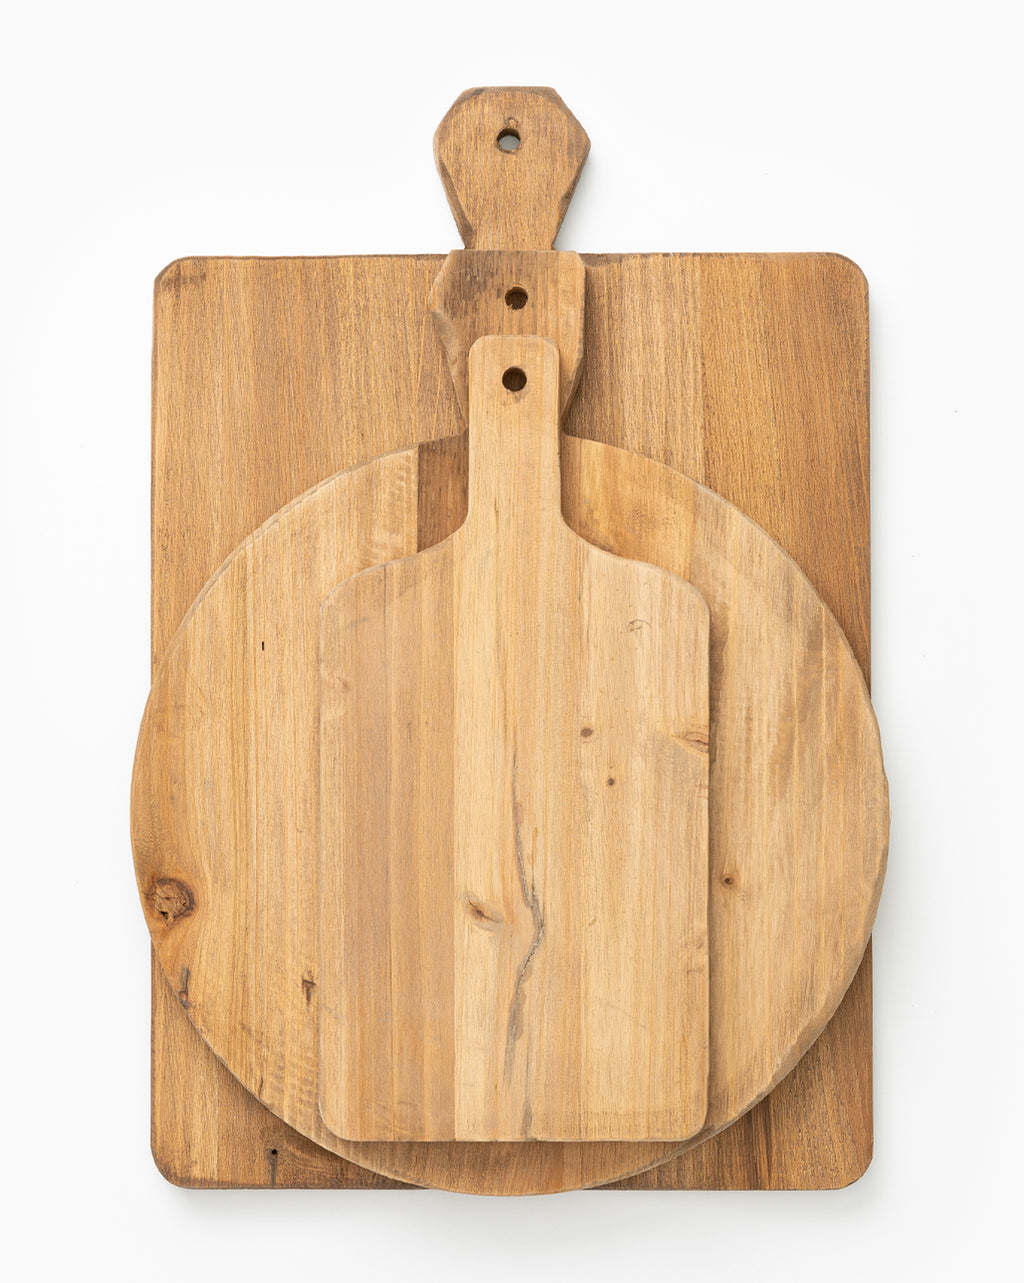 Handcrafted Wooden Chopping Boards For Every Occasion - Ellementry